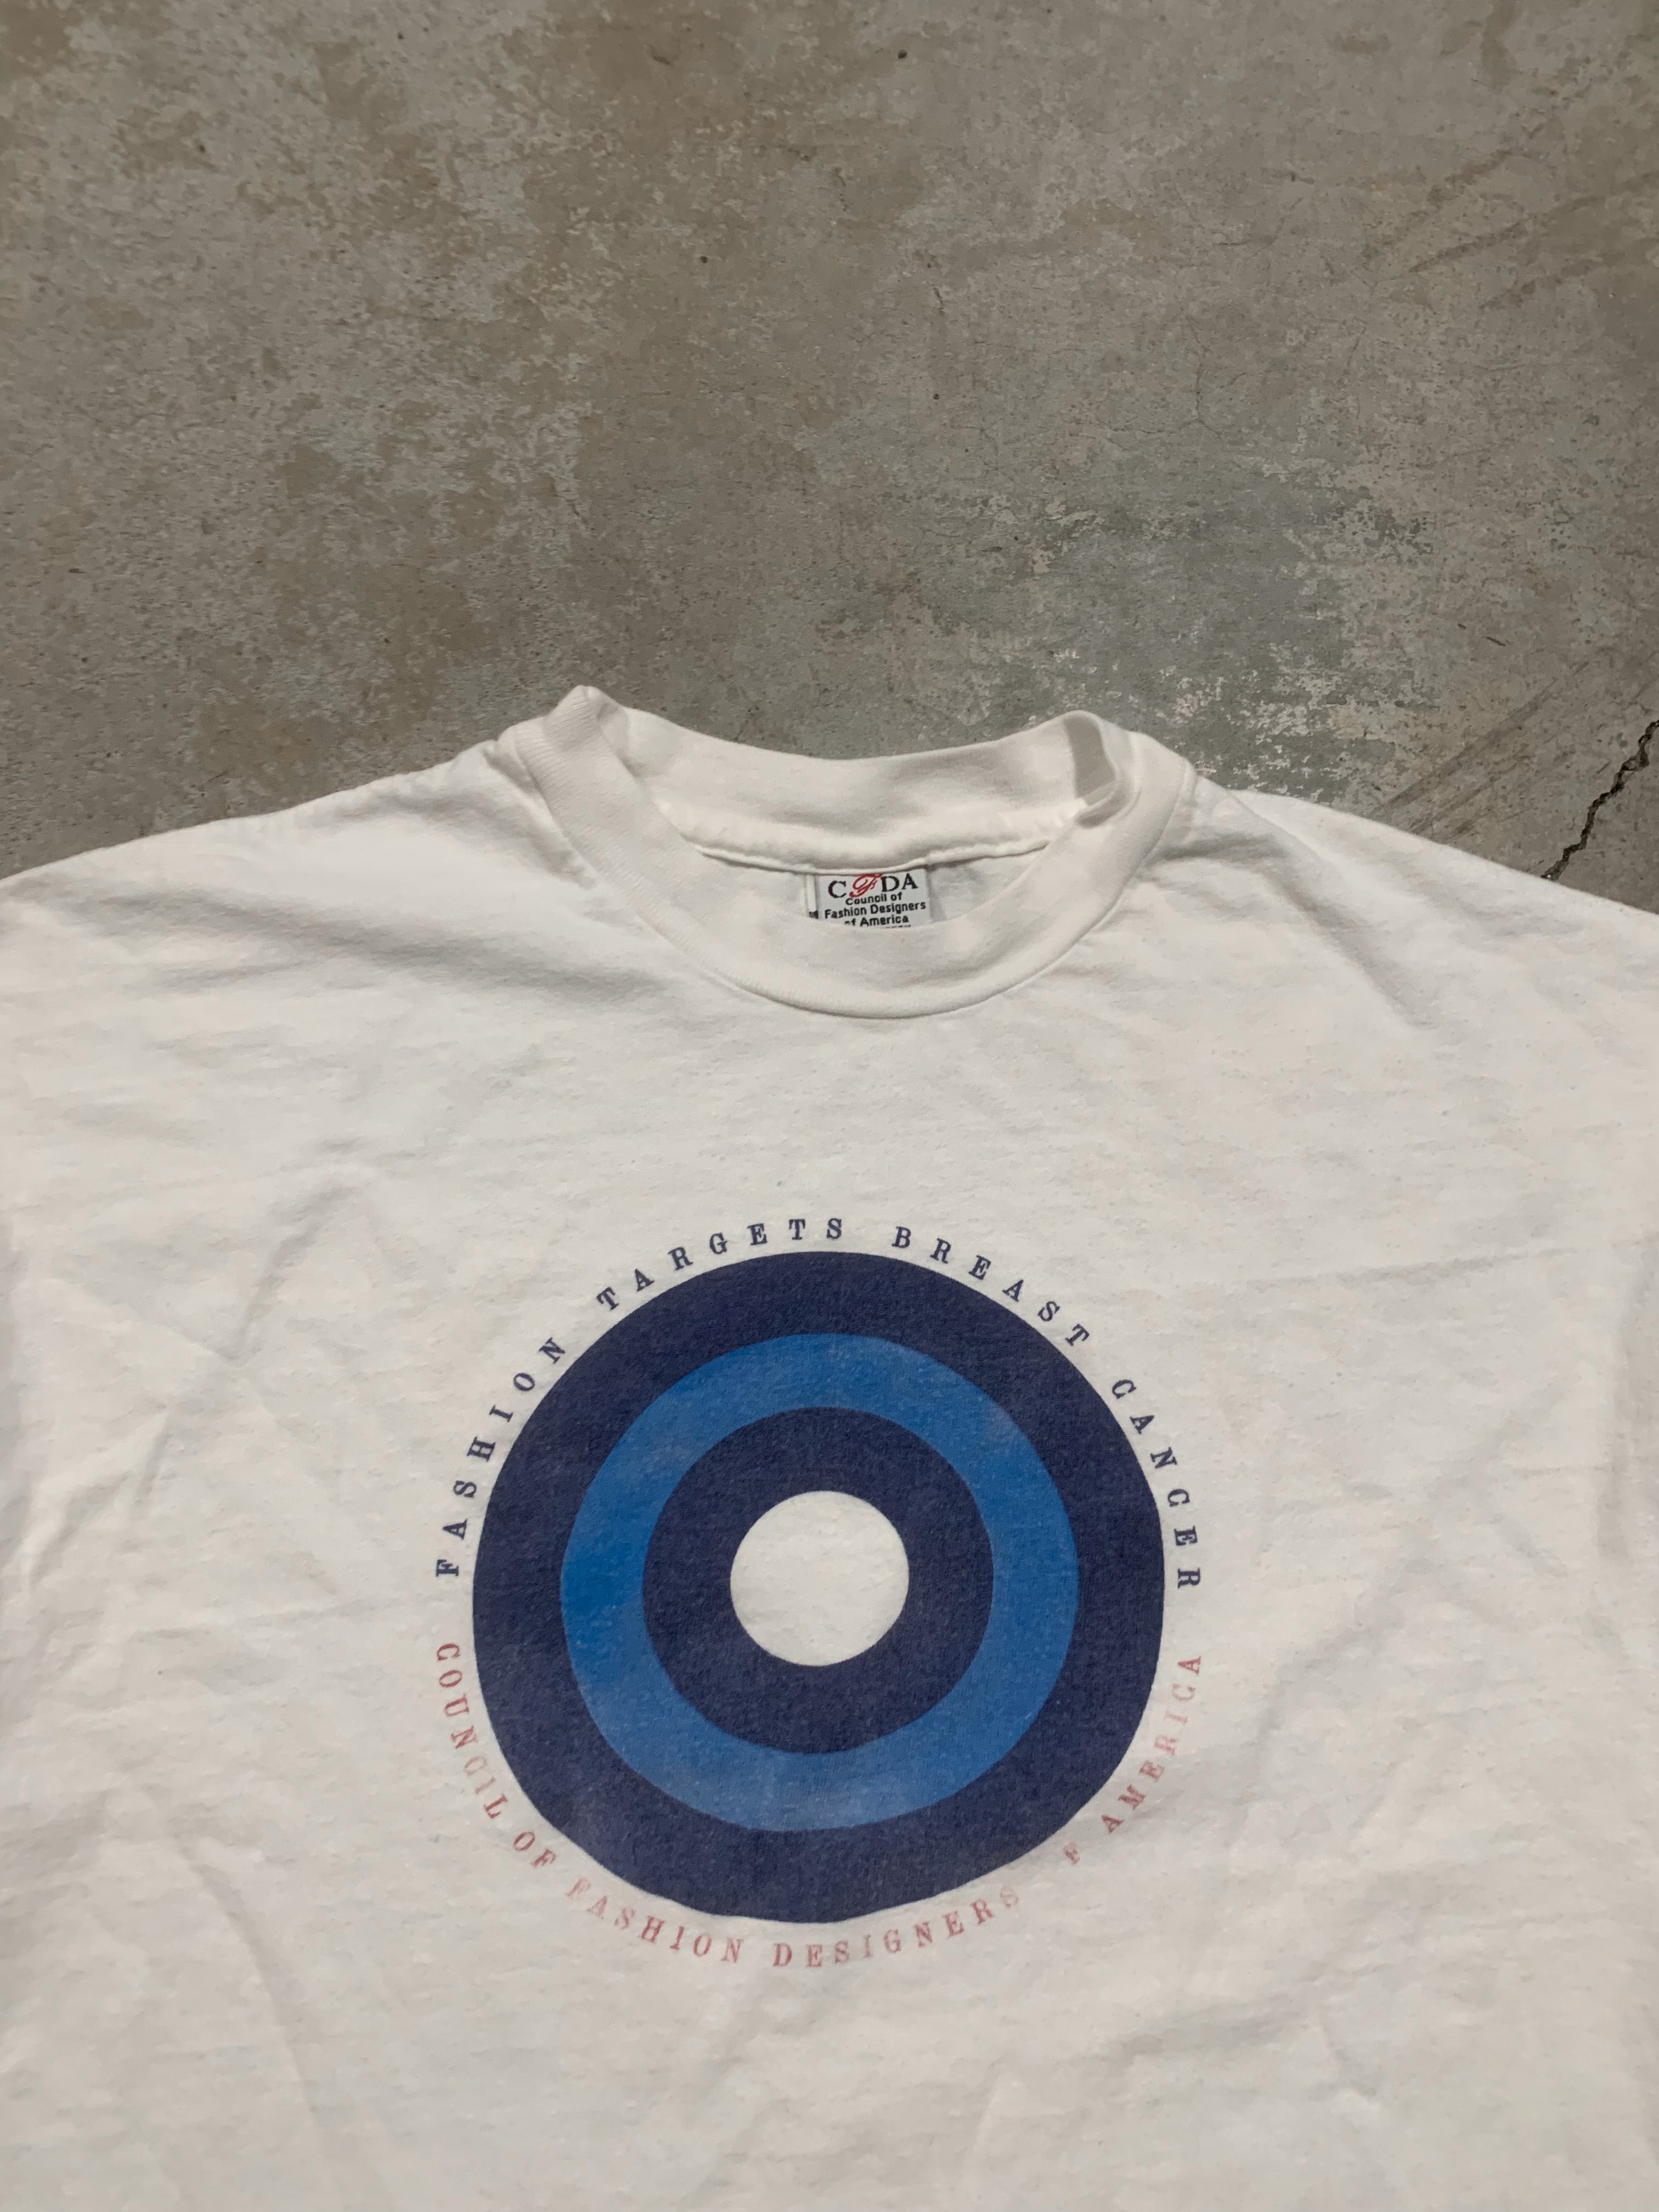 1990s “Fashion Targets Breast Cancer” Tee [L]